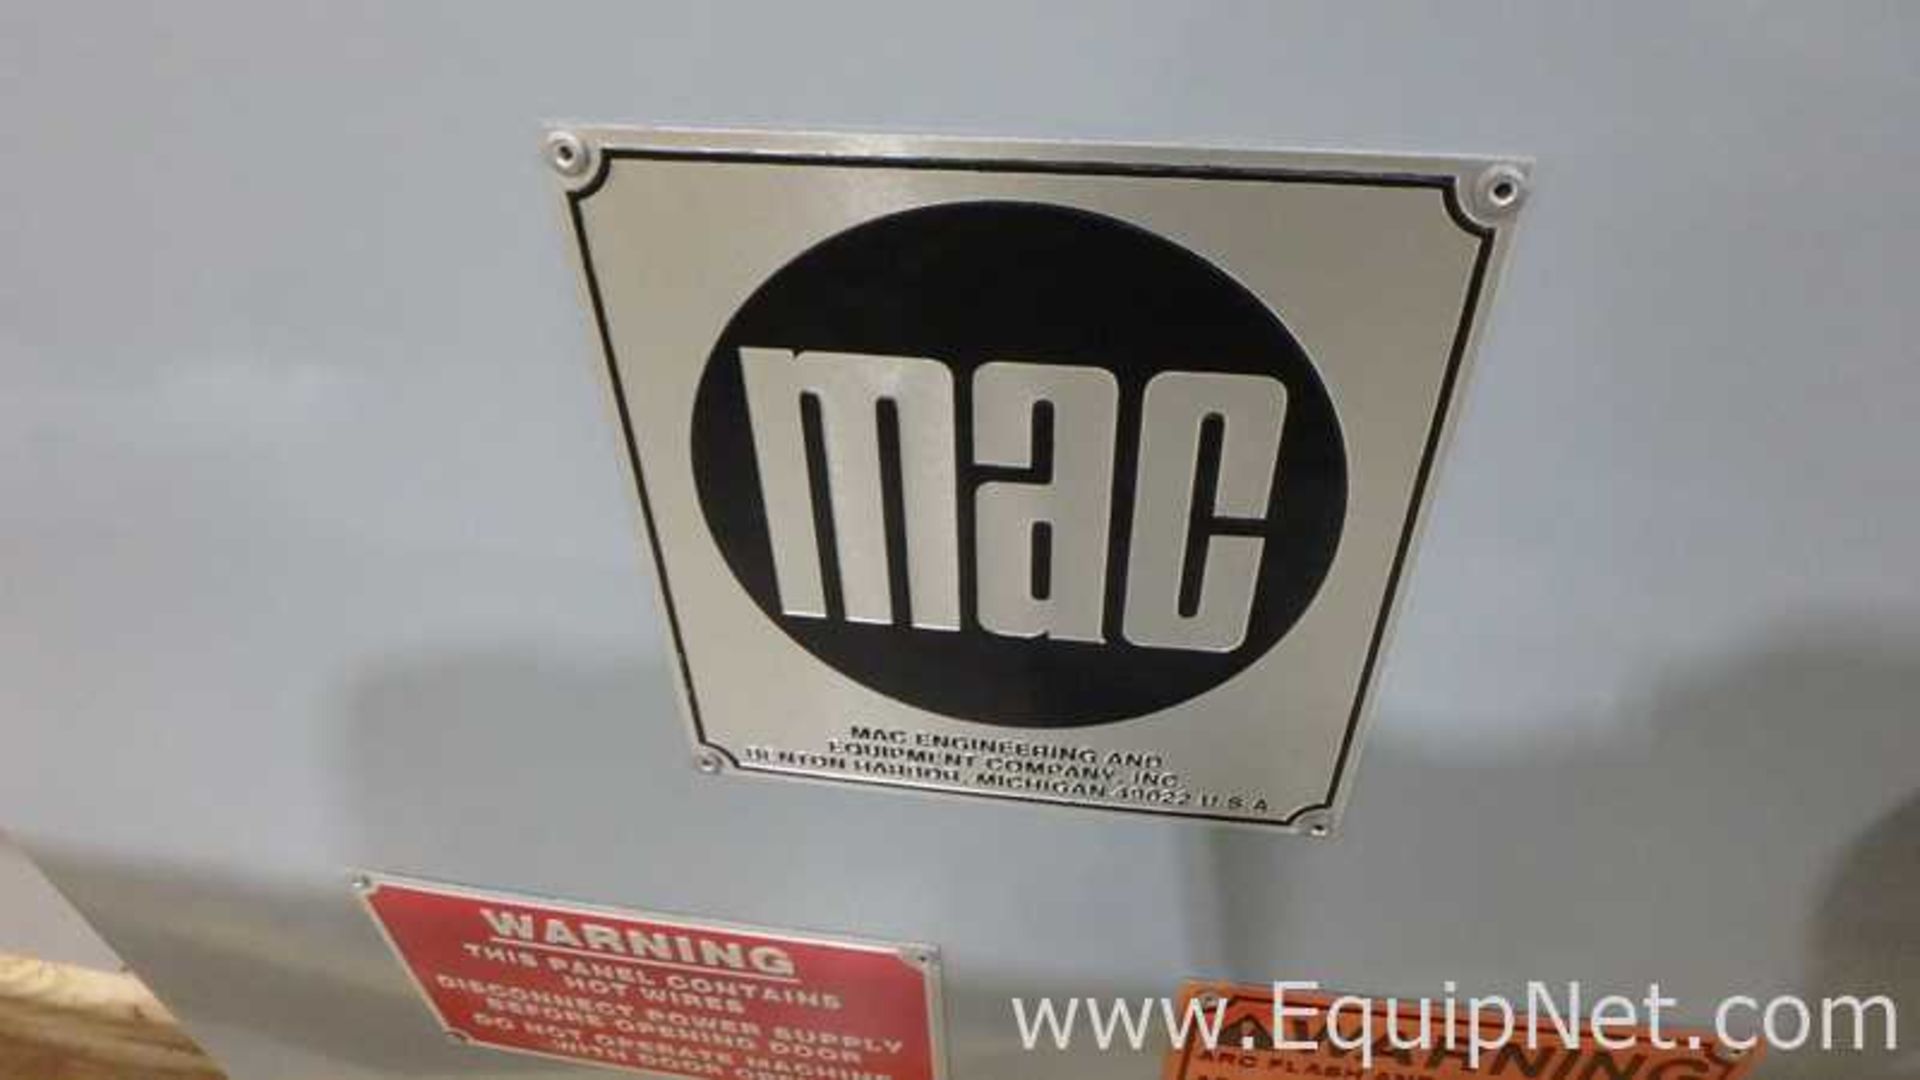 Unused MAC Engineering Dry/Chill/Trim/Oven Includes Trimming Station - Image 11 of 11